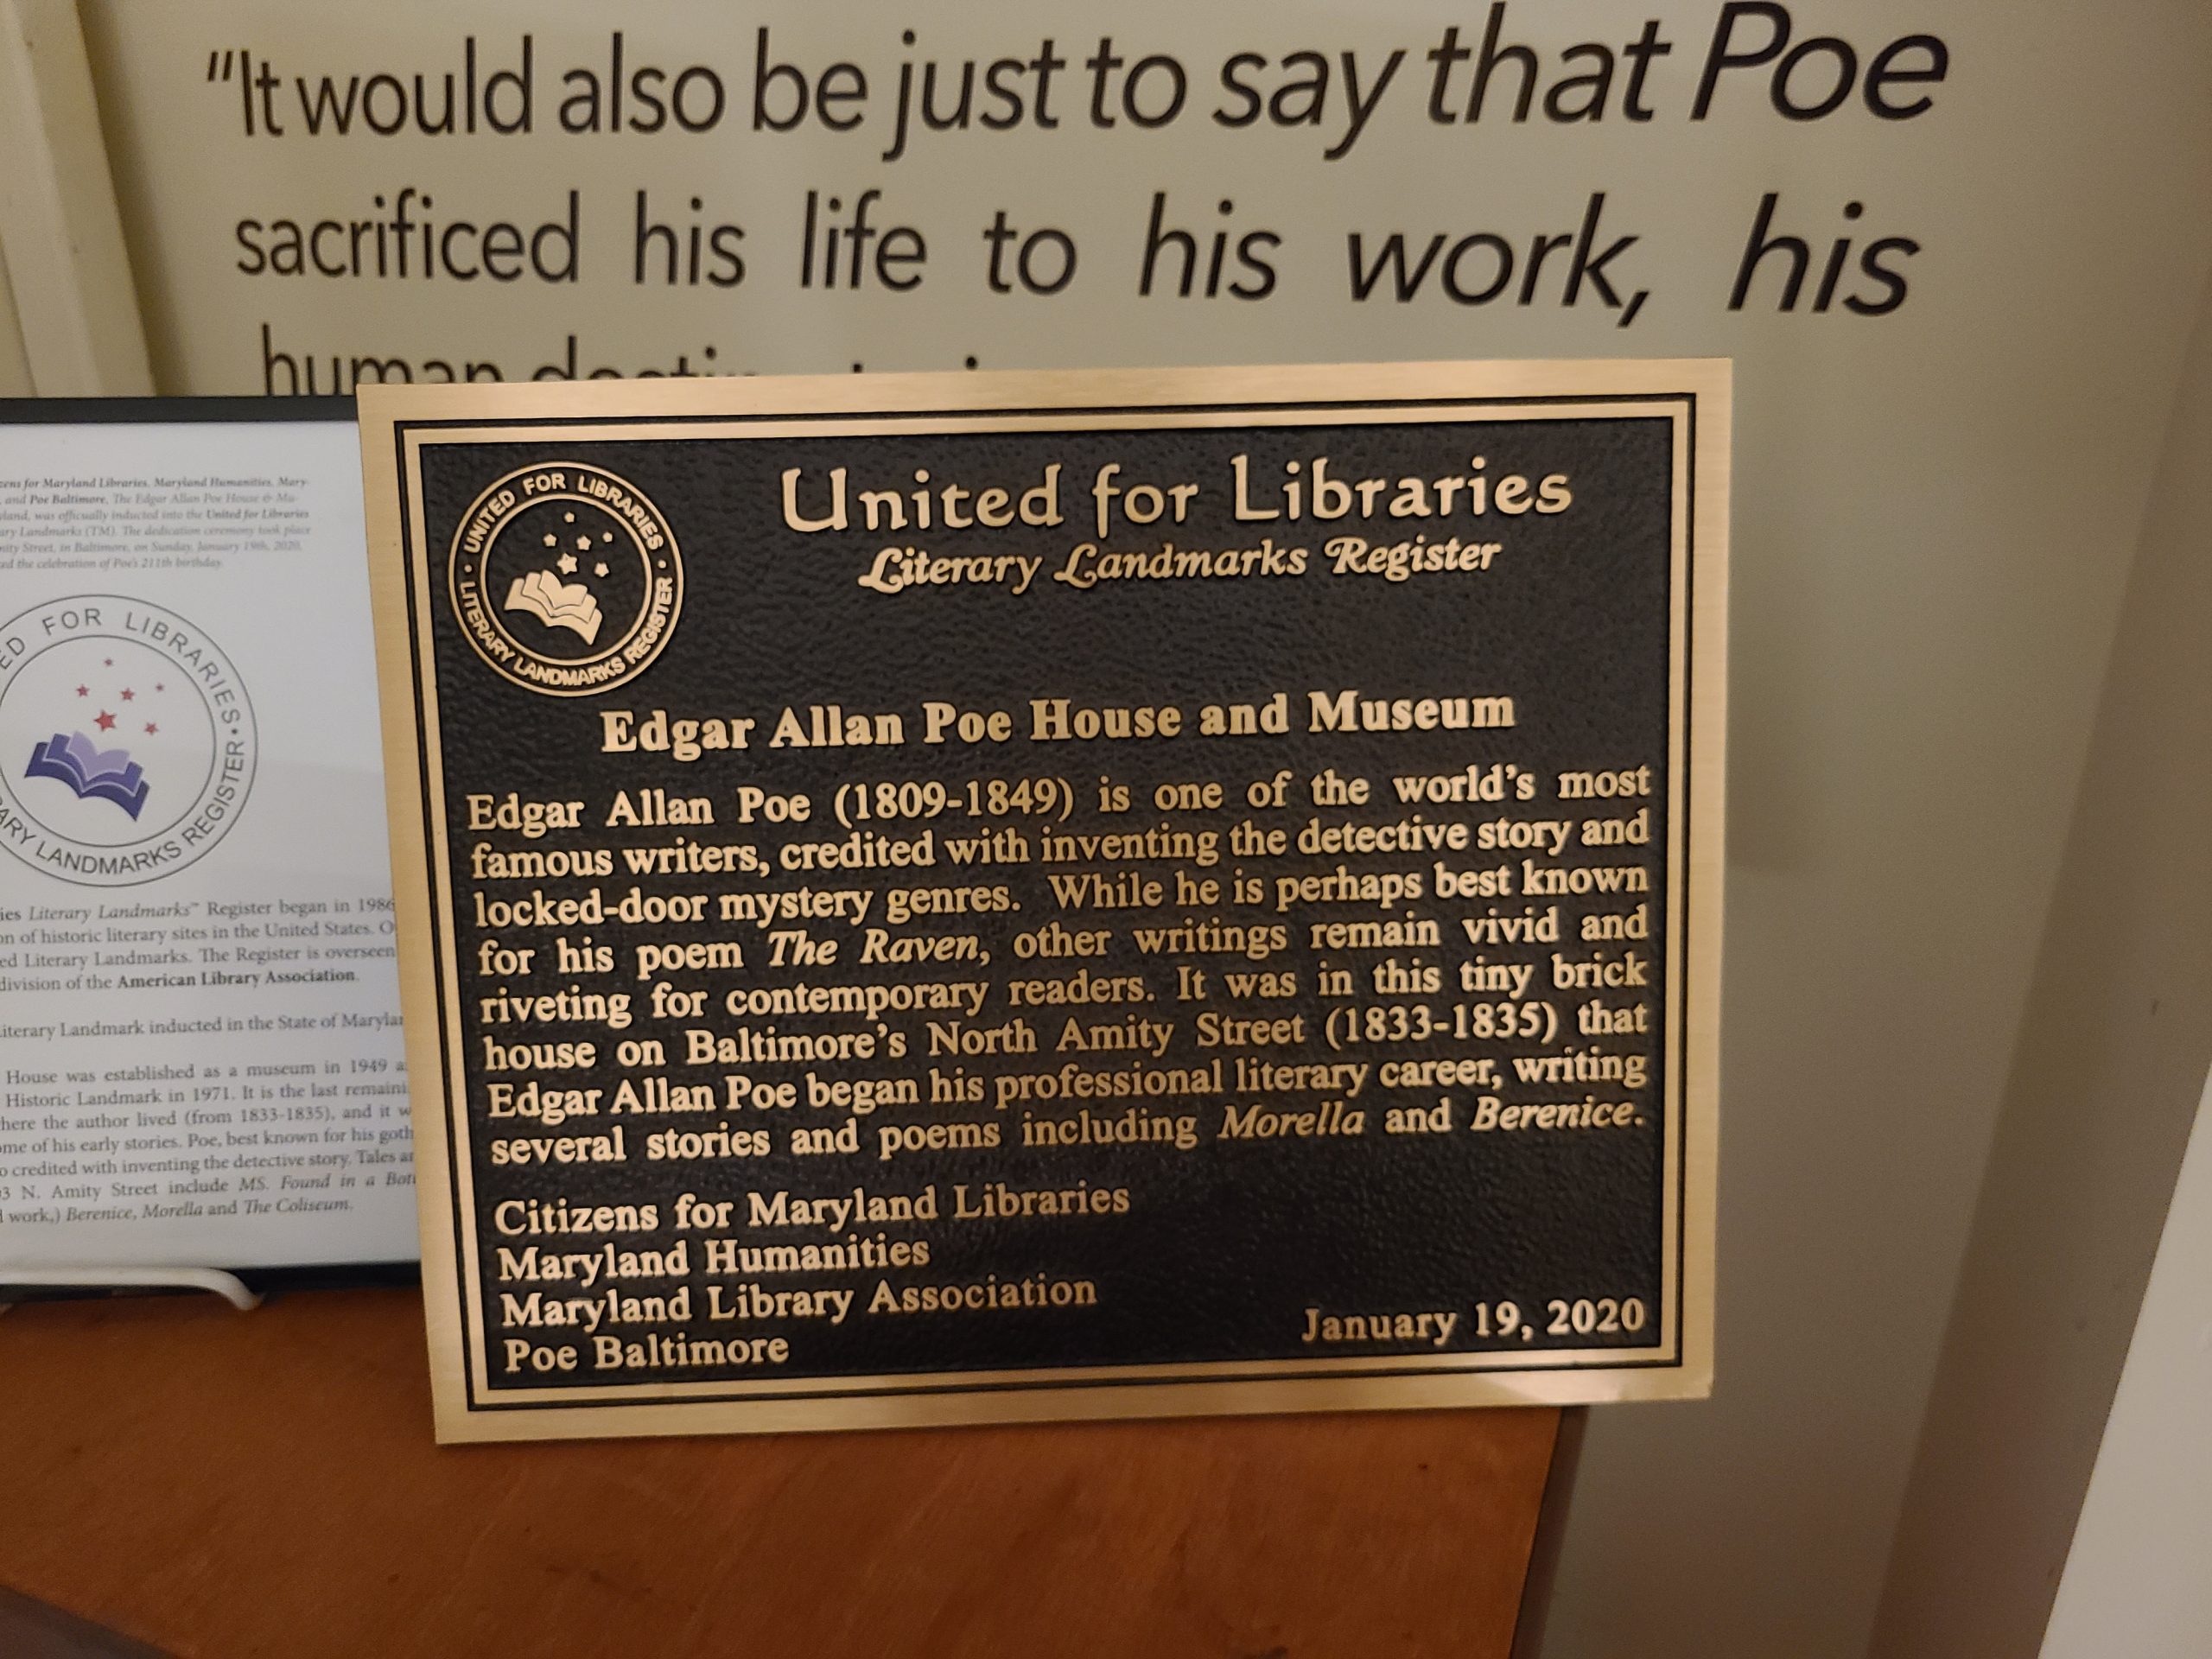 A plaque from the United for Libraries Literary Landmarks Register about the museum